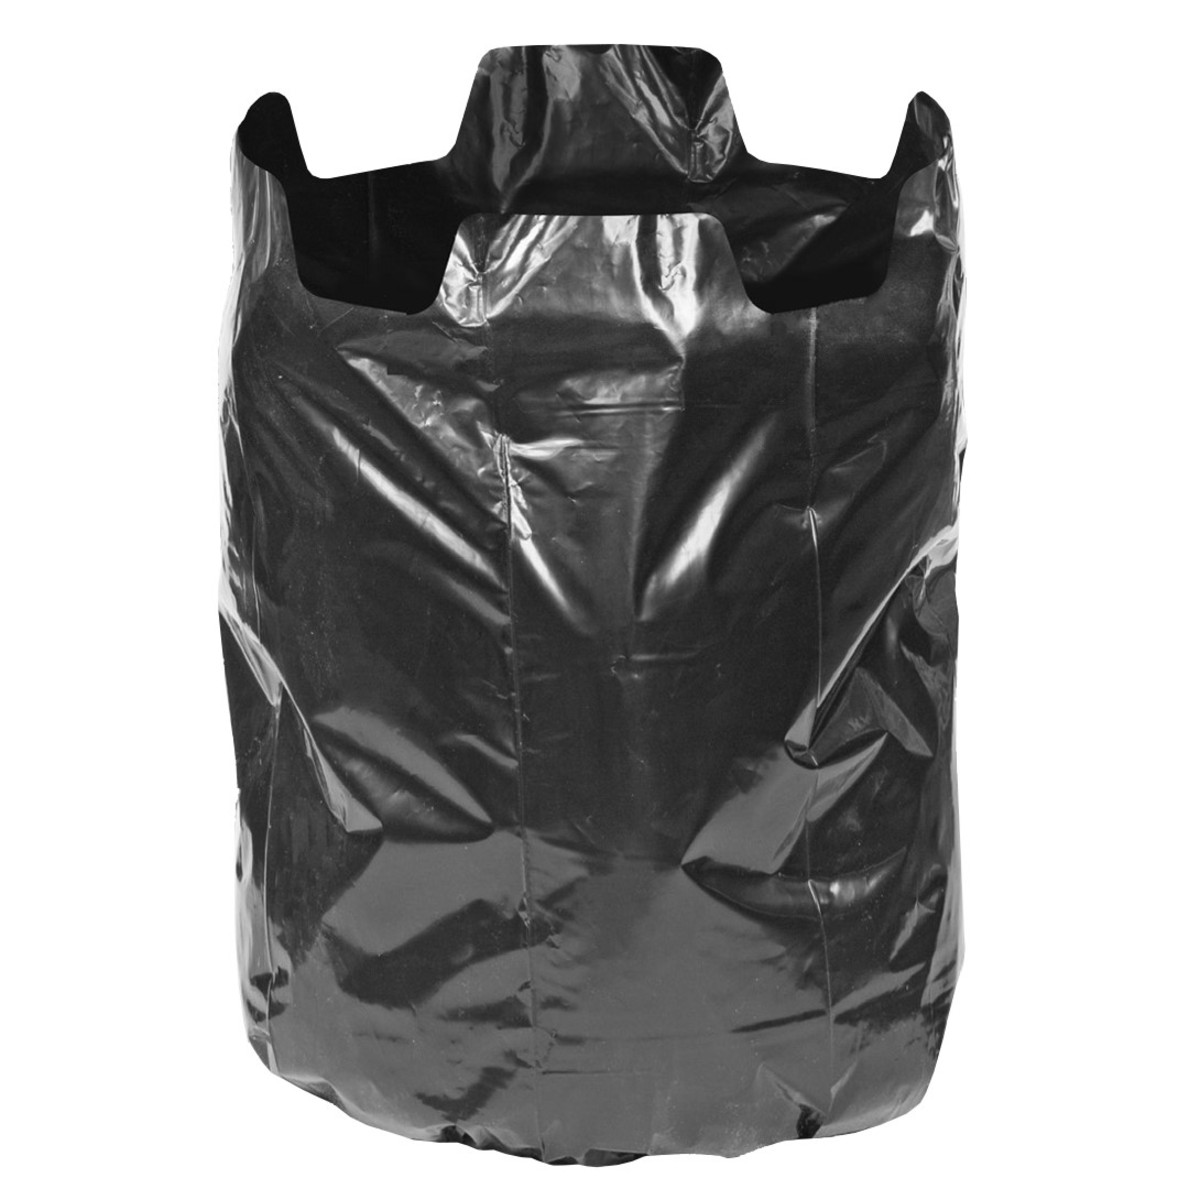 Husky 42 Gallon 3 mil Heavy Duty Contractor Clean-Up Trash Bags